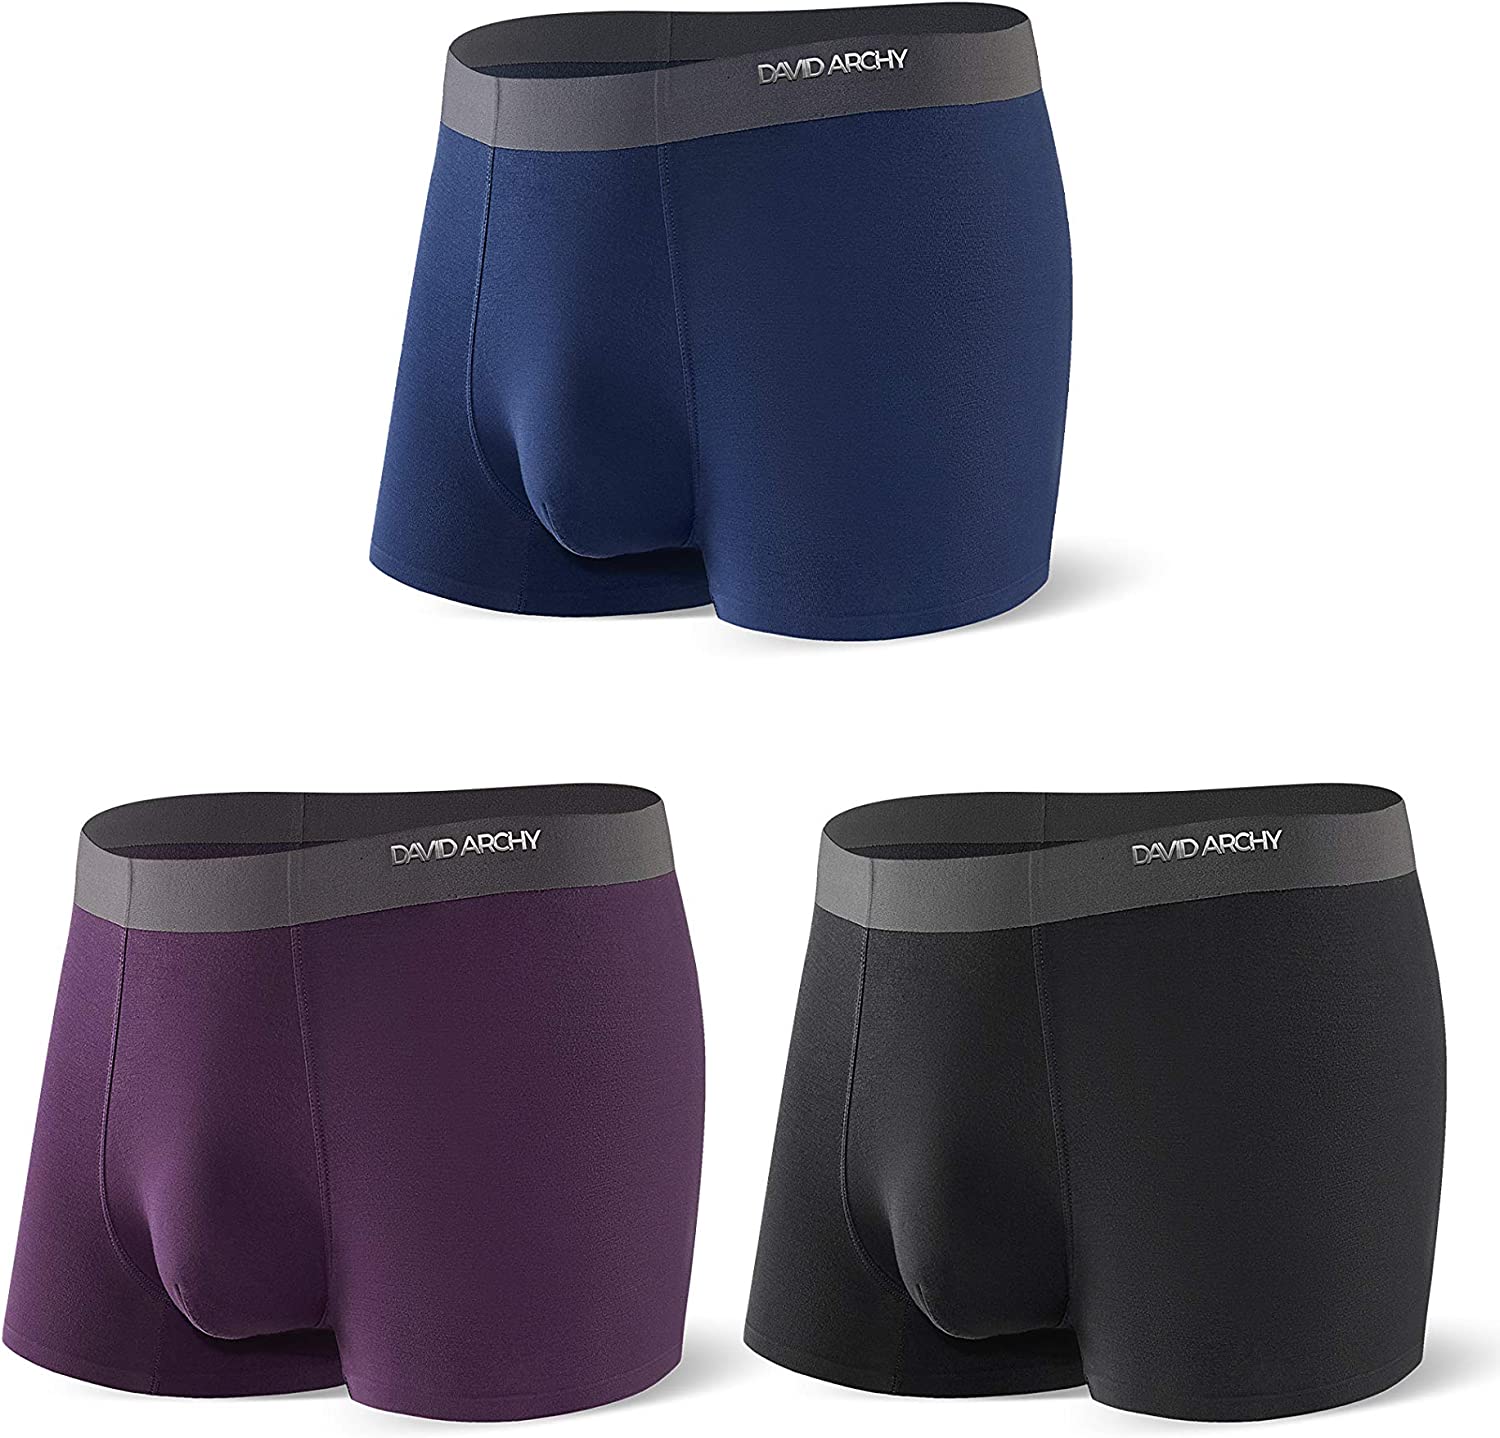 3/4 Pack DAVID ARCHY Mens Boxers Shorts Ultra Soft Micro Modal Mens Underwear Trunks Multipack with 3D Pouch 